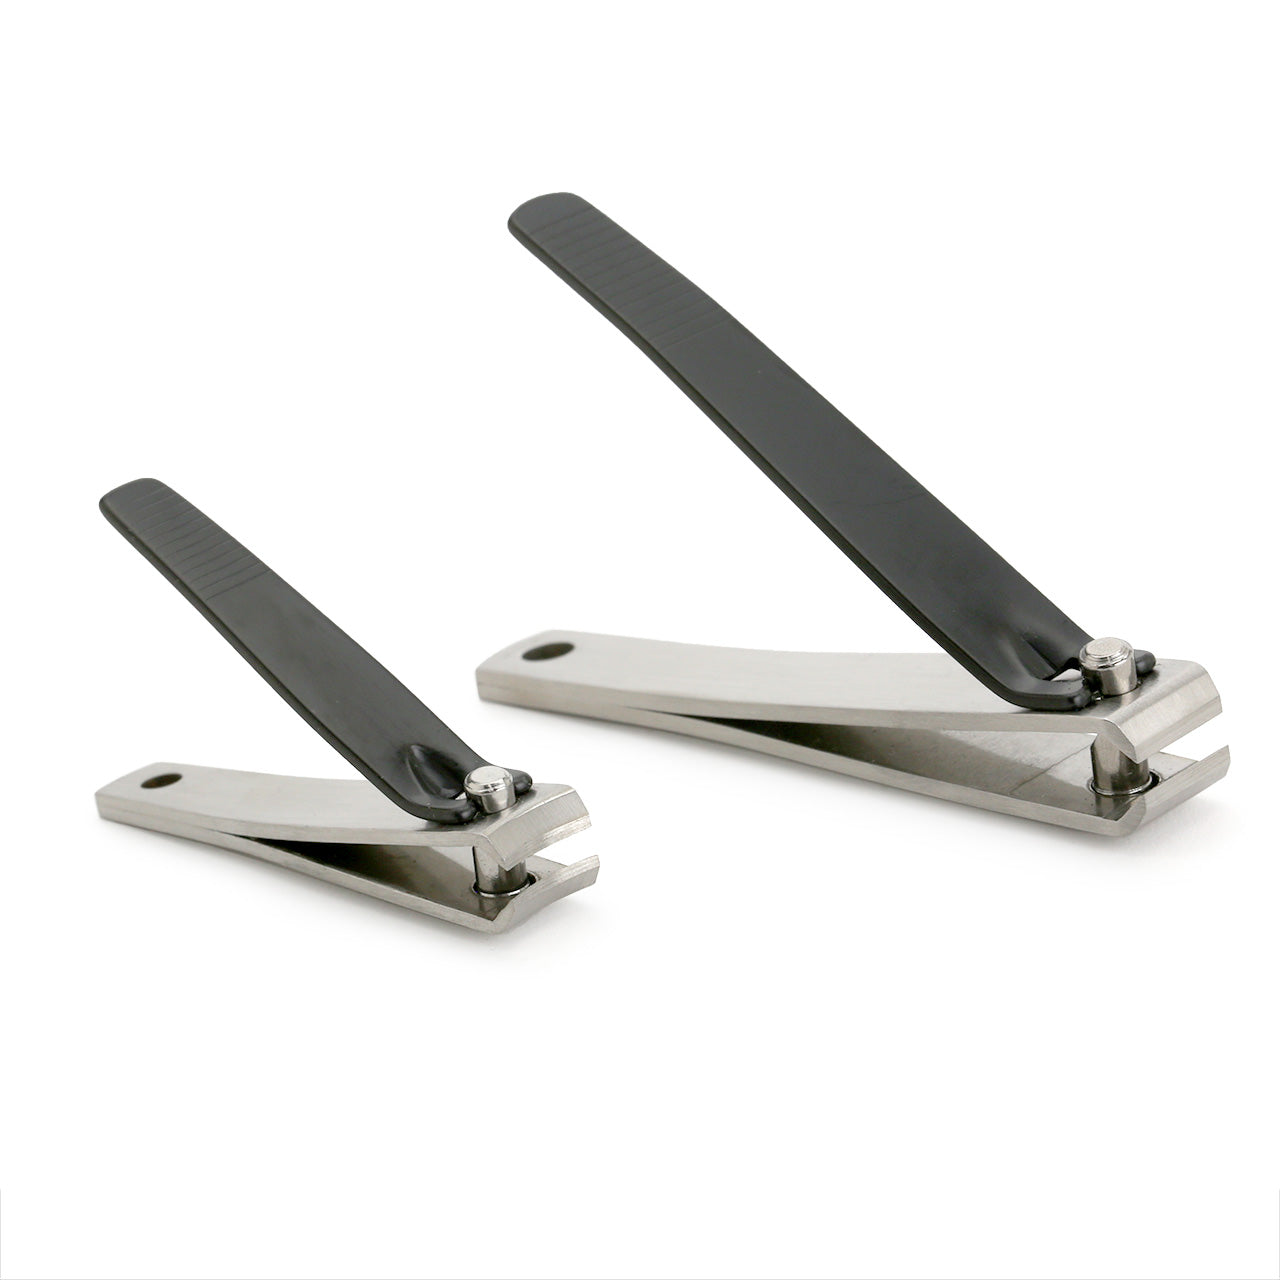 Tweezerman fingernail and toenail clippers are stainless steel with black levers. Pictured here in the closed position